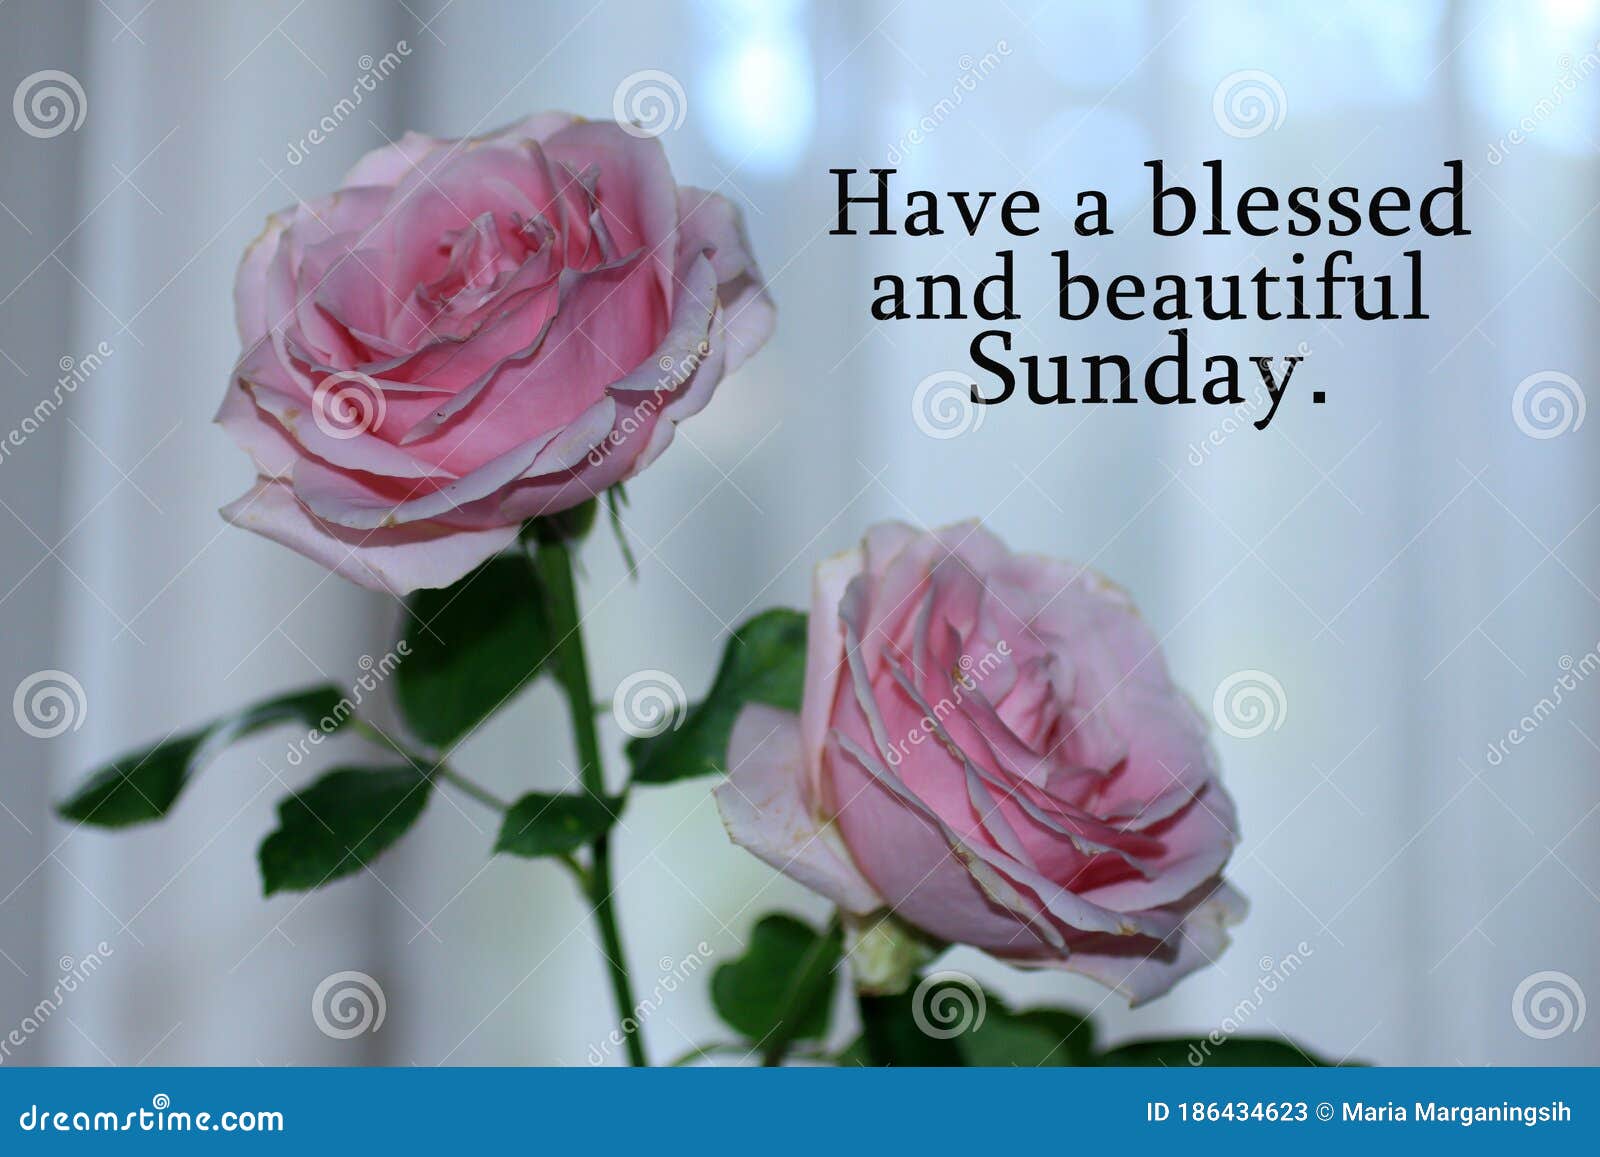 Happy Sunday Card Greeting with Beautiful Pink Roses Blossom on ...